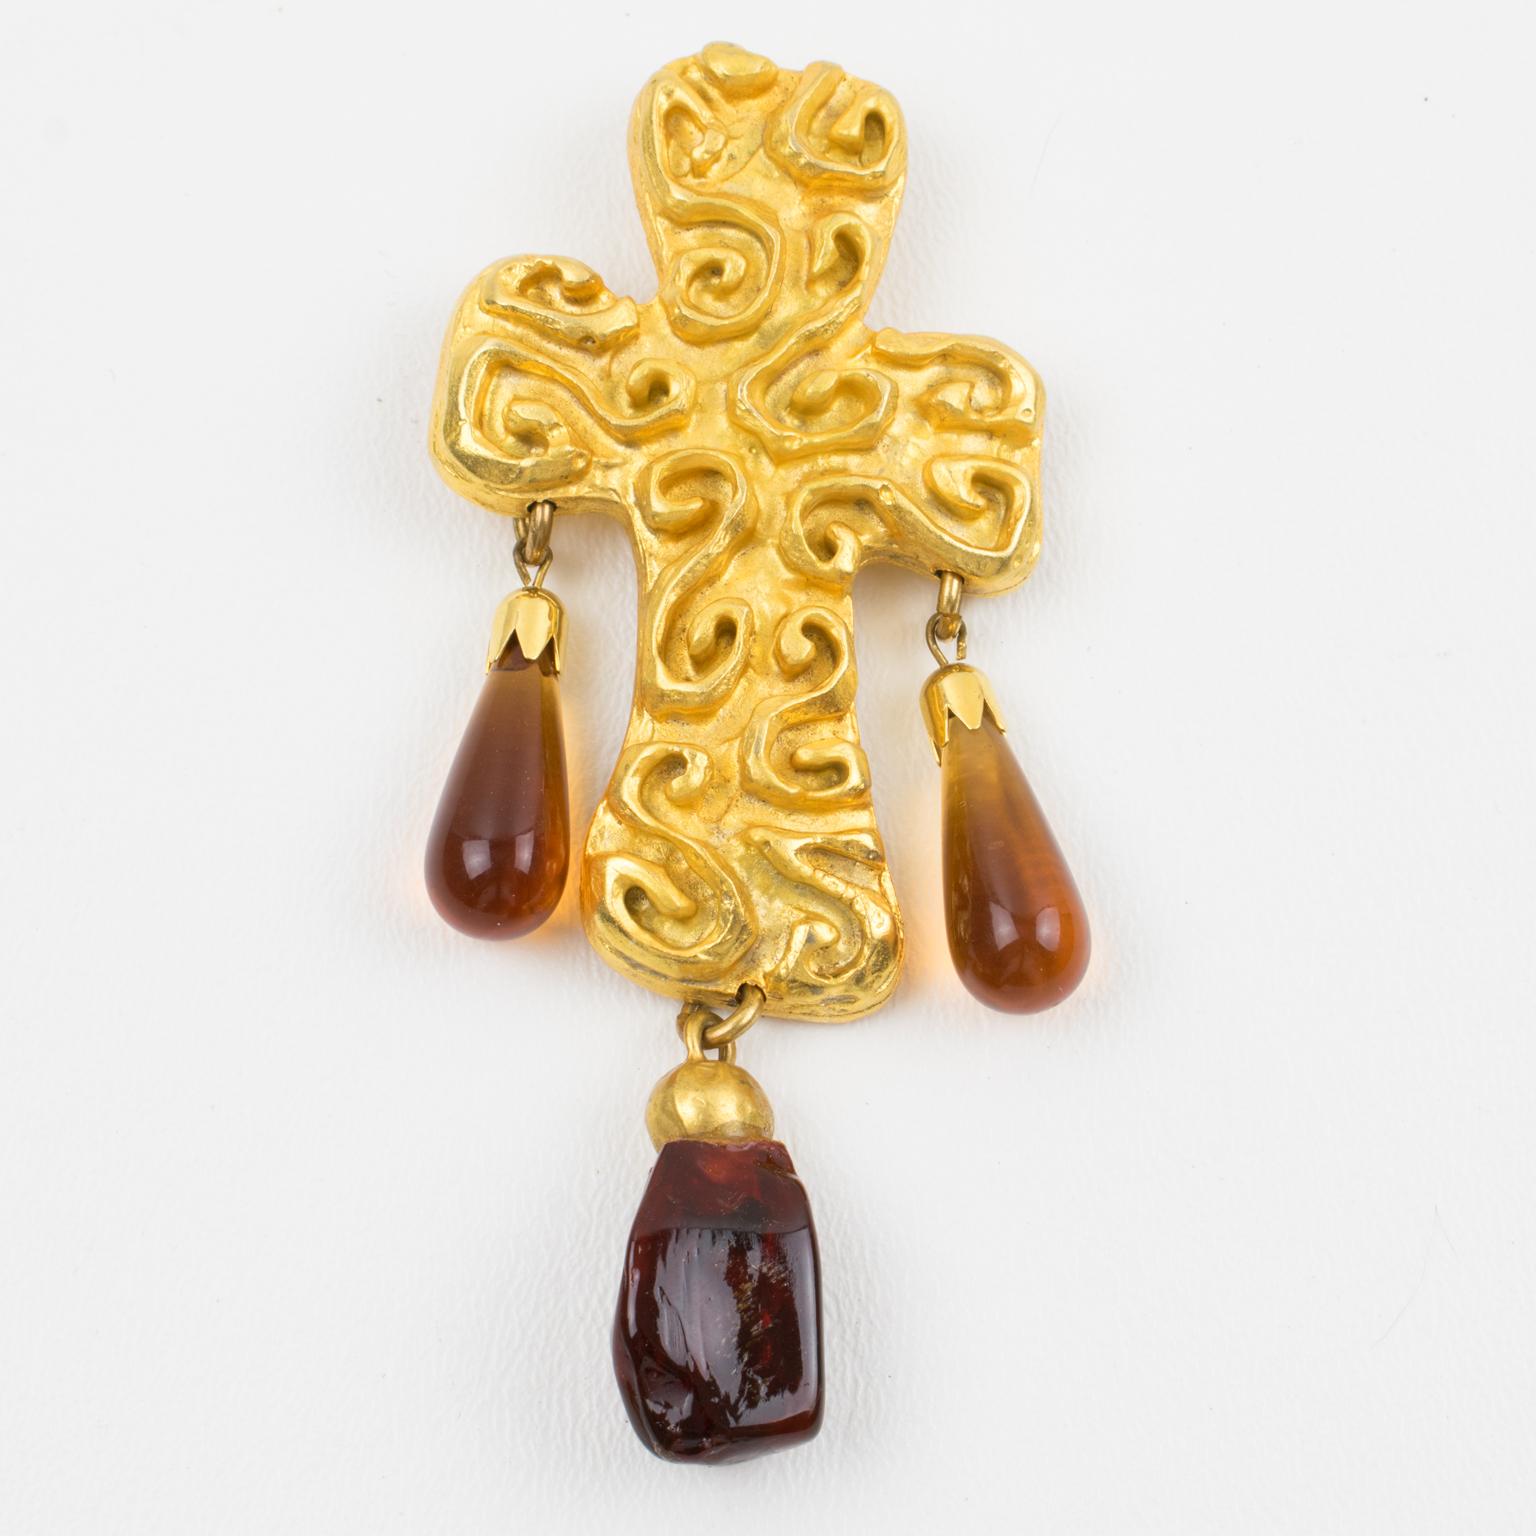 An elegant 1980s oversized cross-pin brooch created by French designer Edouard Rambaud, Paris. 
Features a byzantine-inspired design with a gilt metal cross-shaped element all textured and carved, and ornate with dangling resin drop charm cabochons